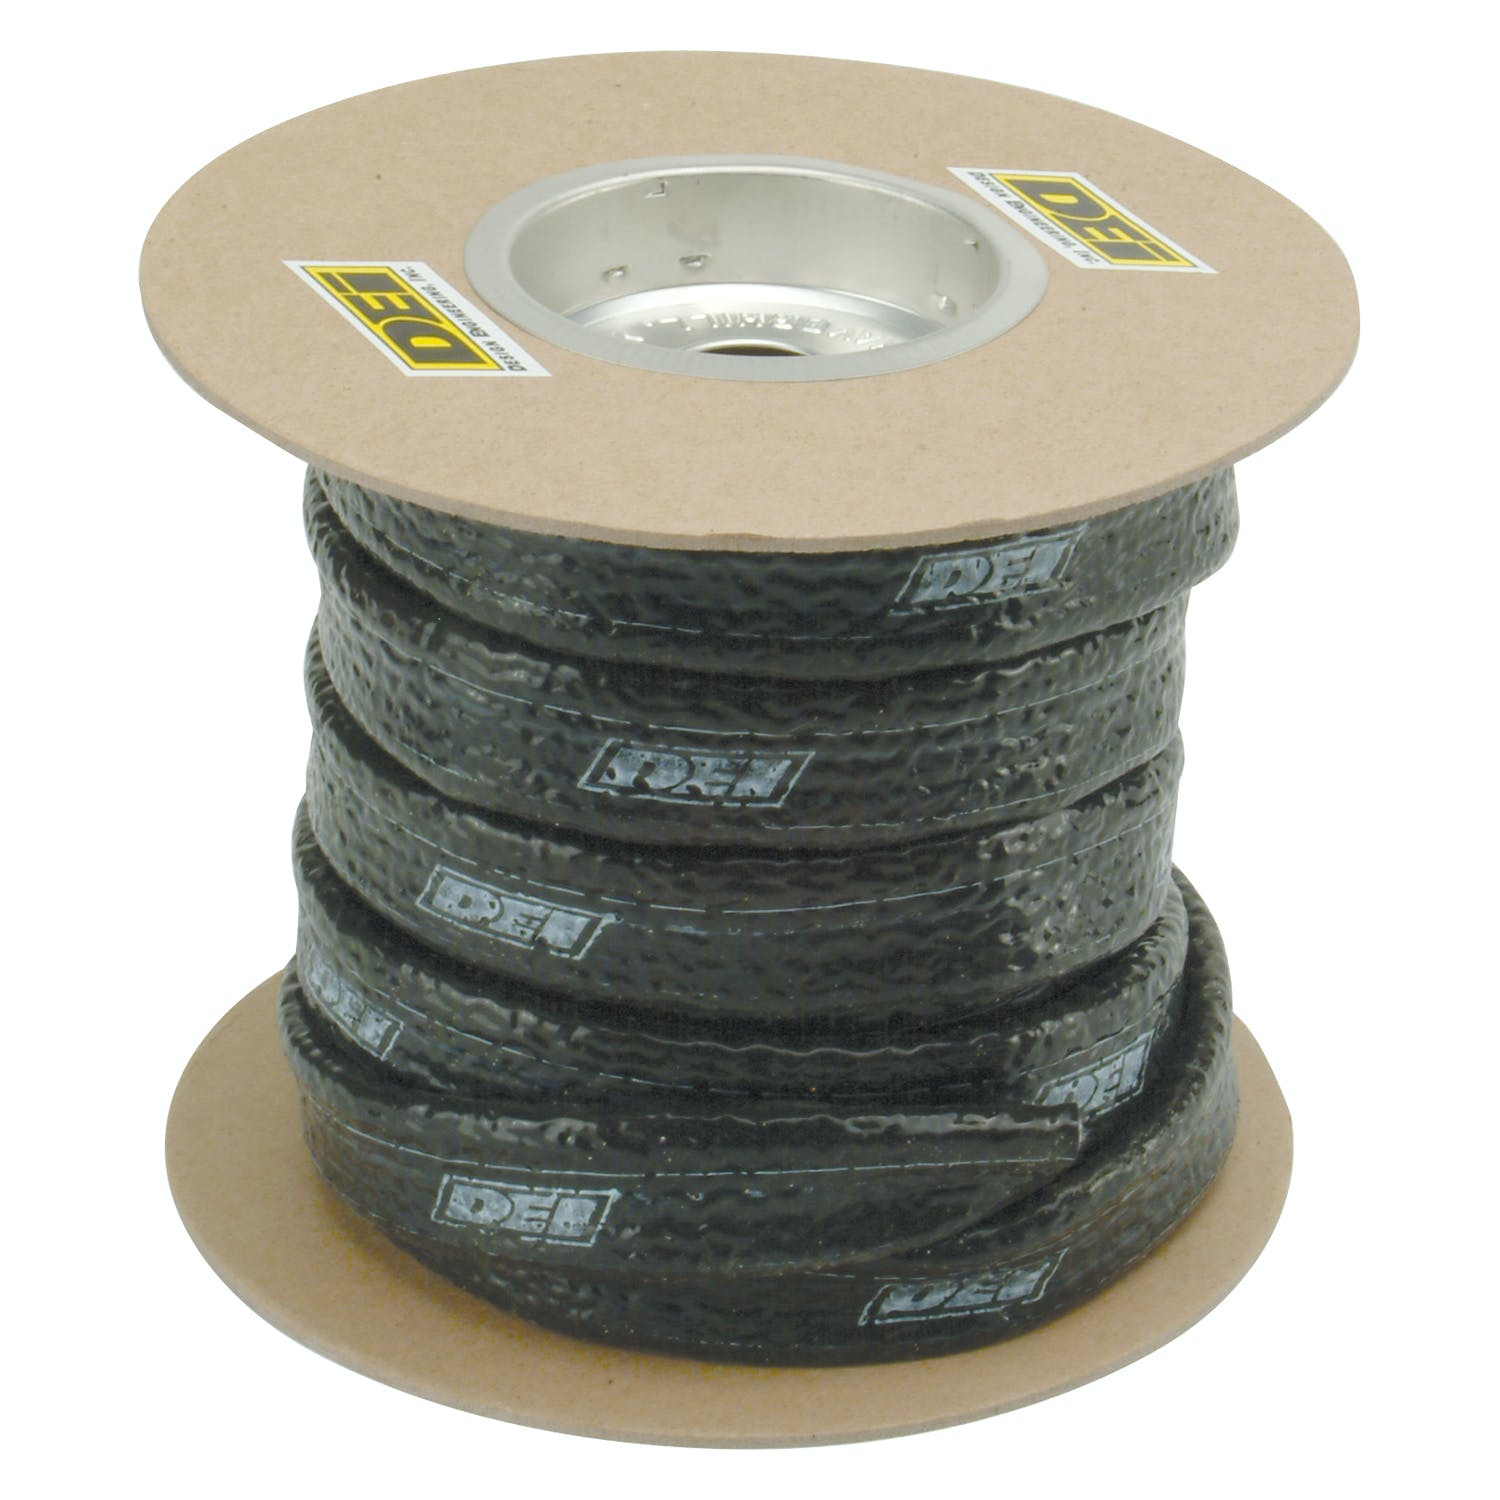 Design Engineering, Inc. 91474 Fire Sleeve 1 I.D. - Bulk per foot (Fire Tape not included)